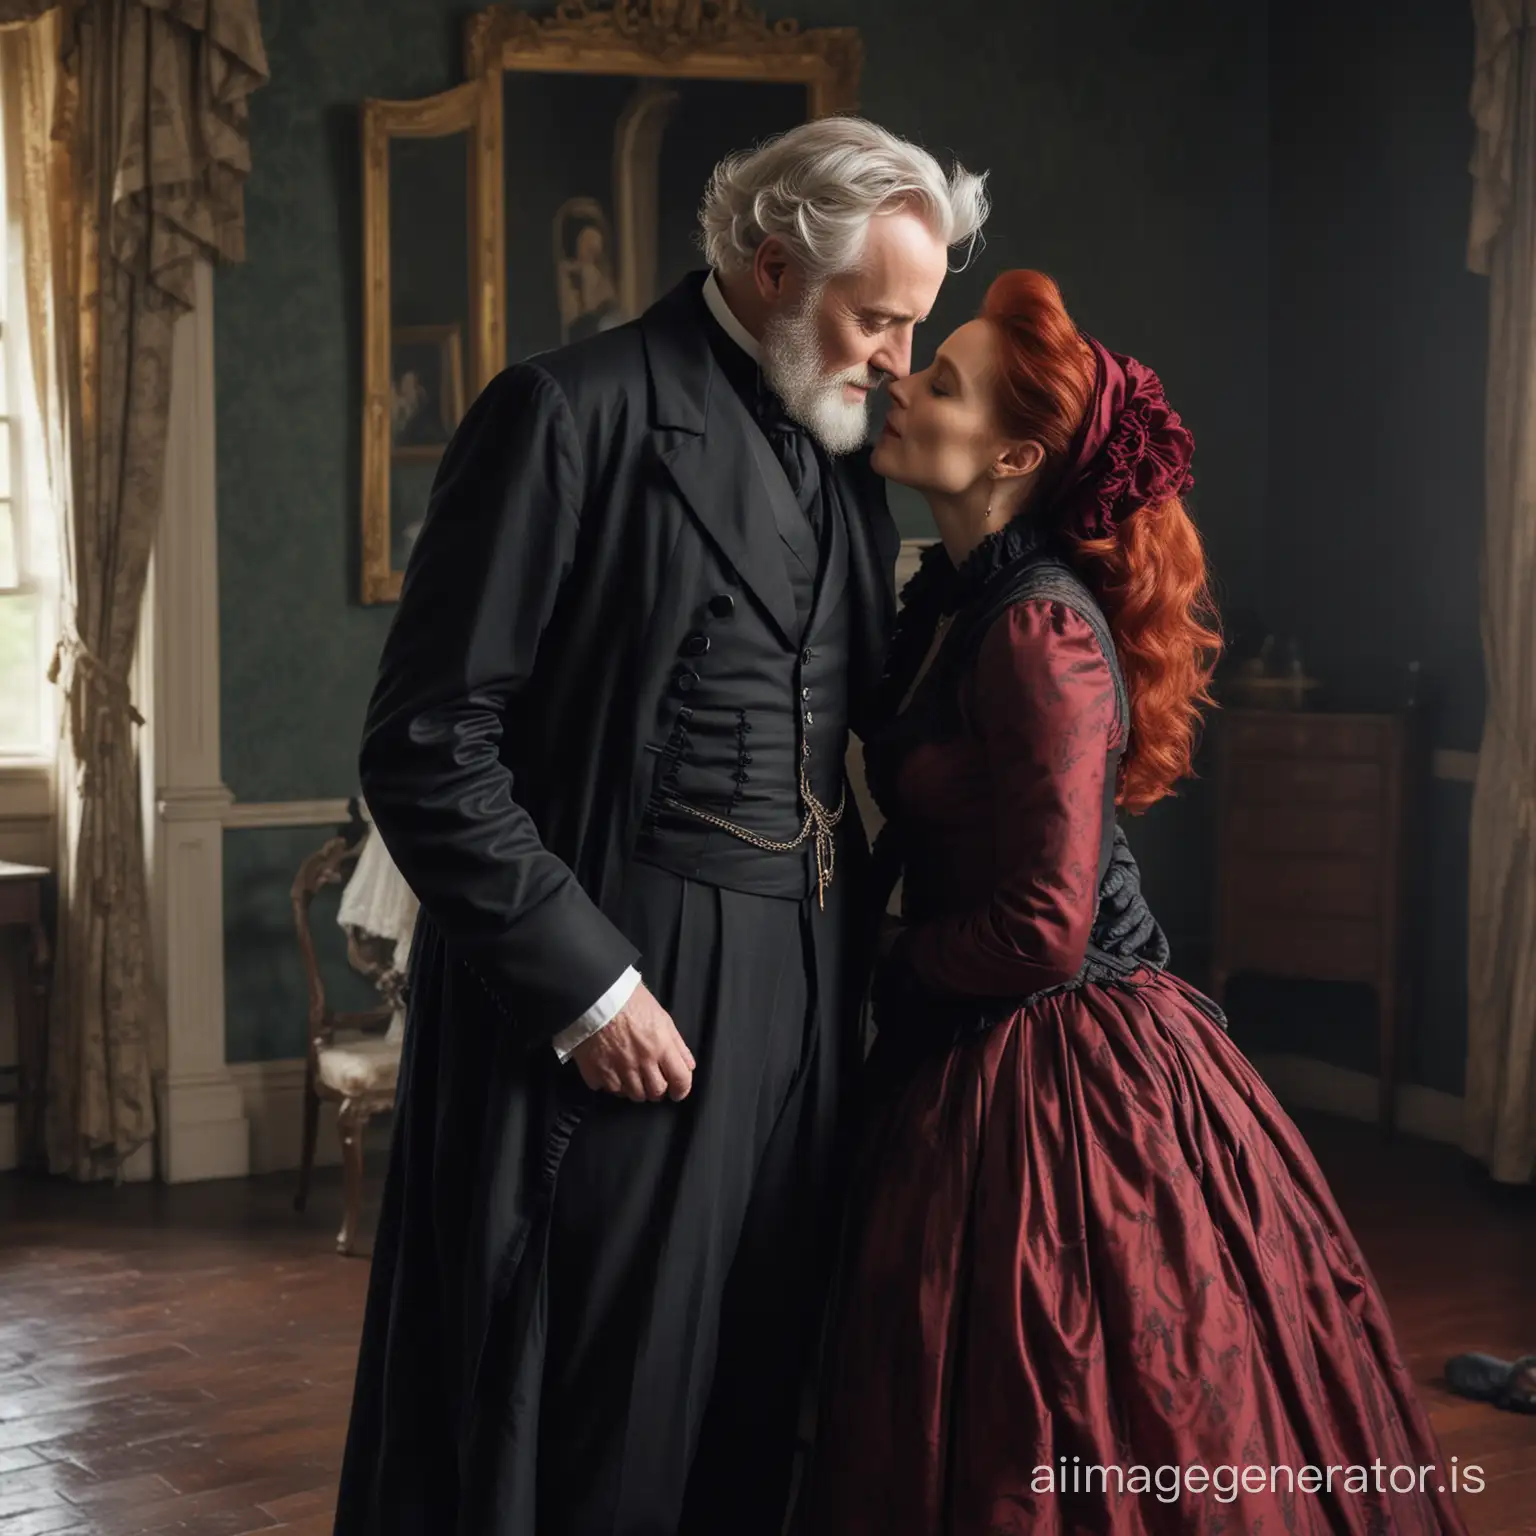 Romantic-Victorian-Newlyweds-Redhaired-Gillian-Anderson-Embracing-Her-Husband-in-Elegant-Attire